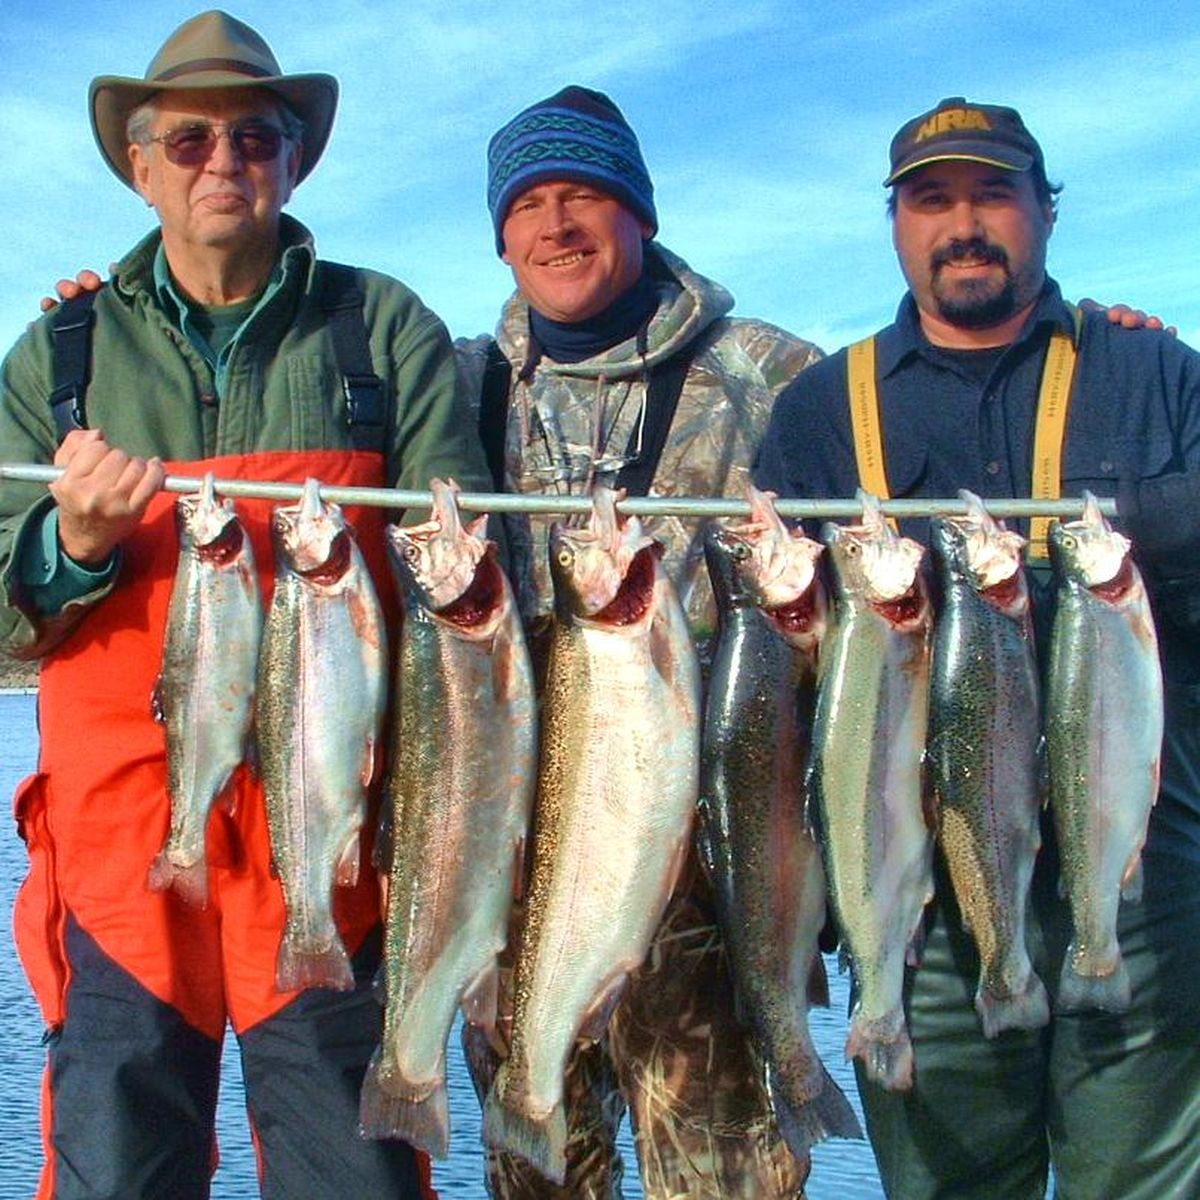 James Cato of Selah, Wash., fished with son Mike and guide Jeff Witkowski and one other angler on Nov. 13, 2011, to land this their 4 guy limit of Rainbows from Lake Rufus Woods.  They had brought 38 to the boat by noon. The largest was 9.2 pounds. (Darrell & Dad